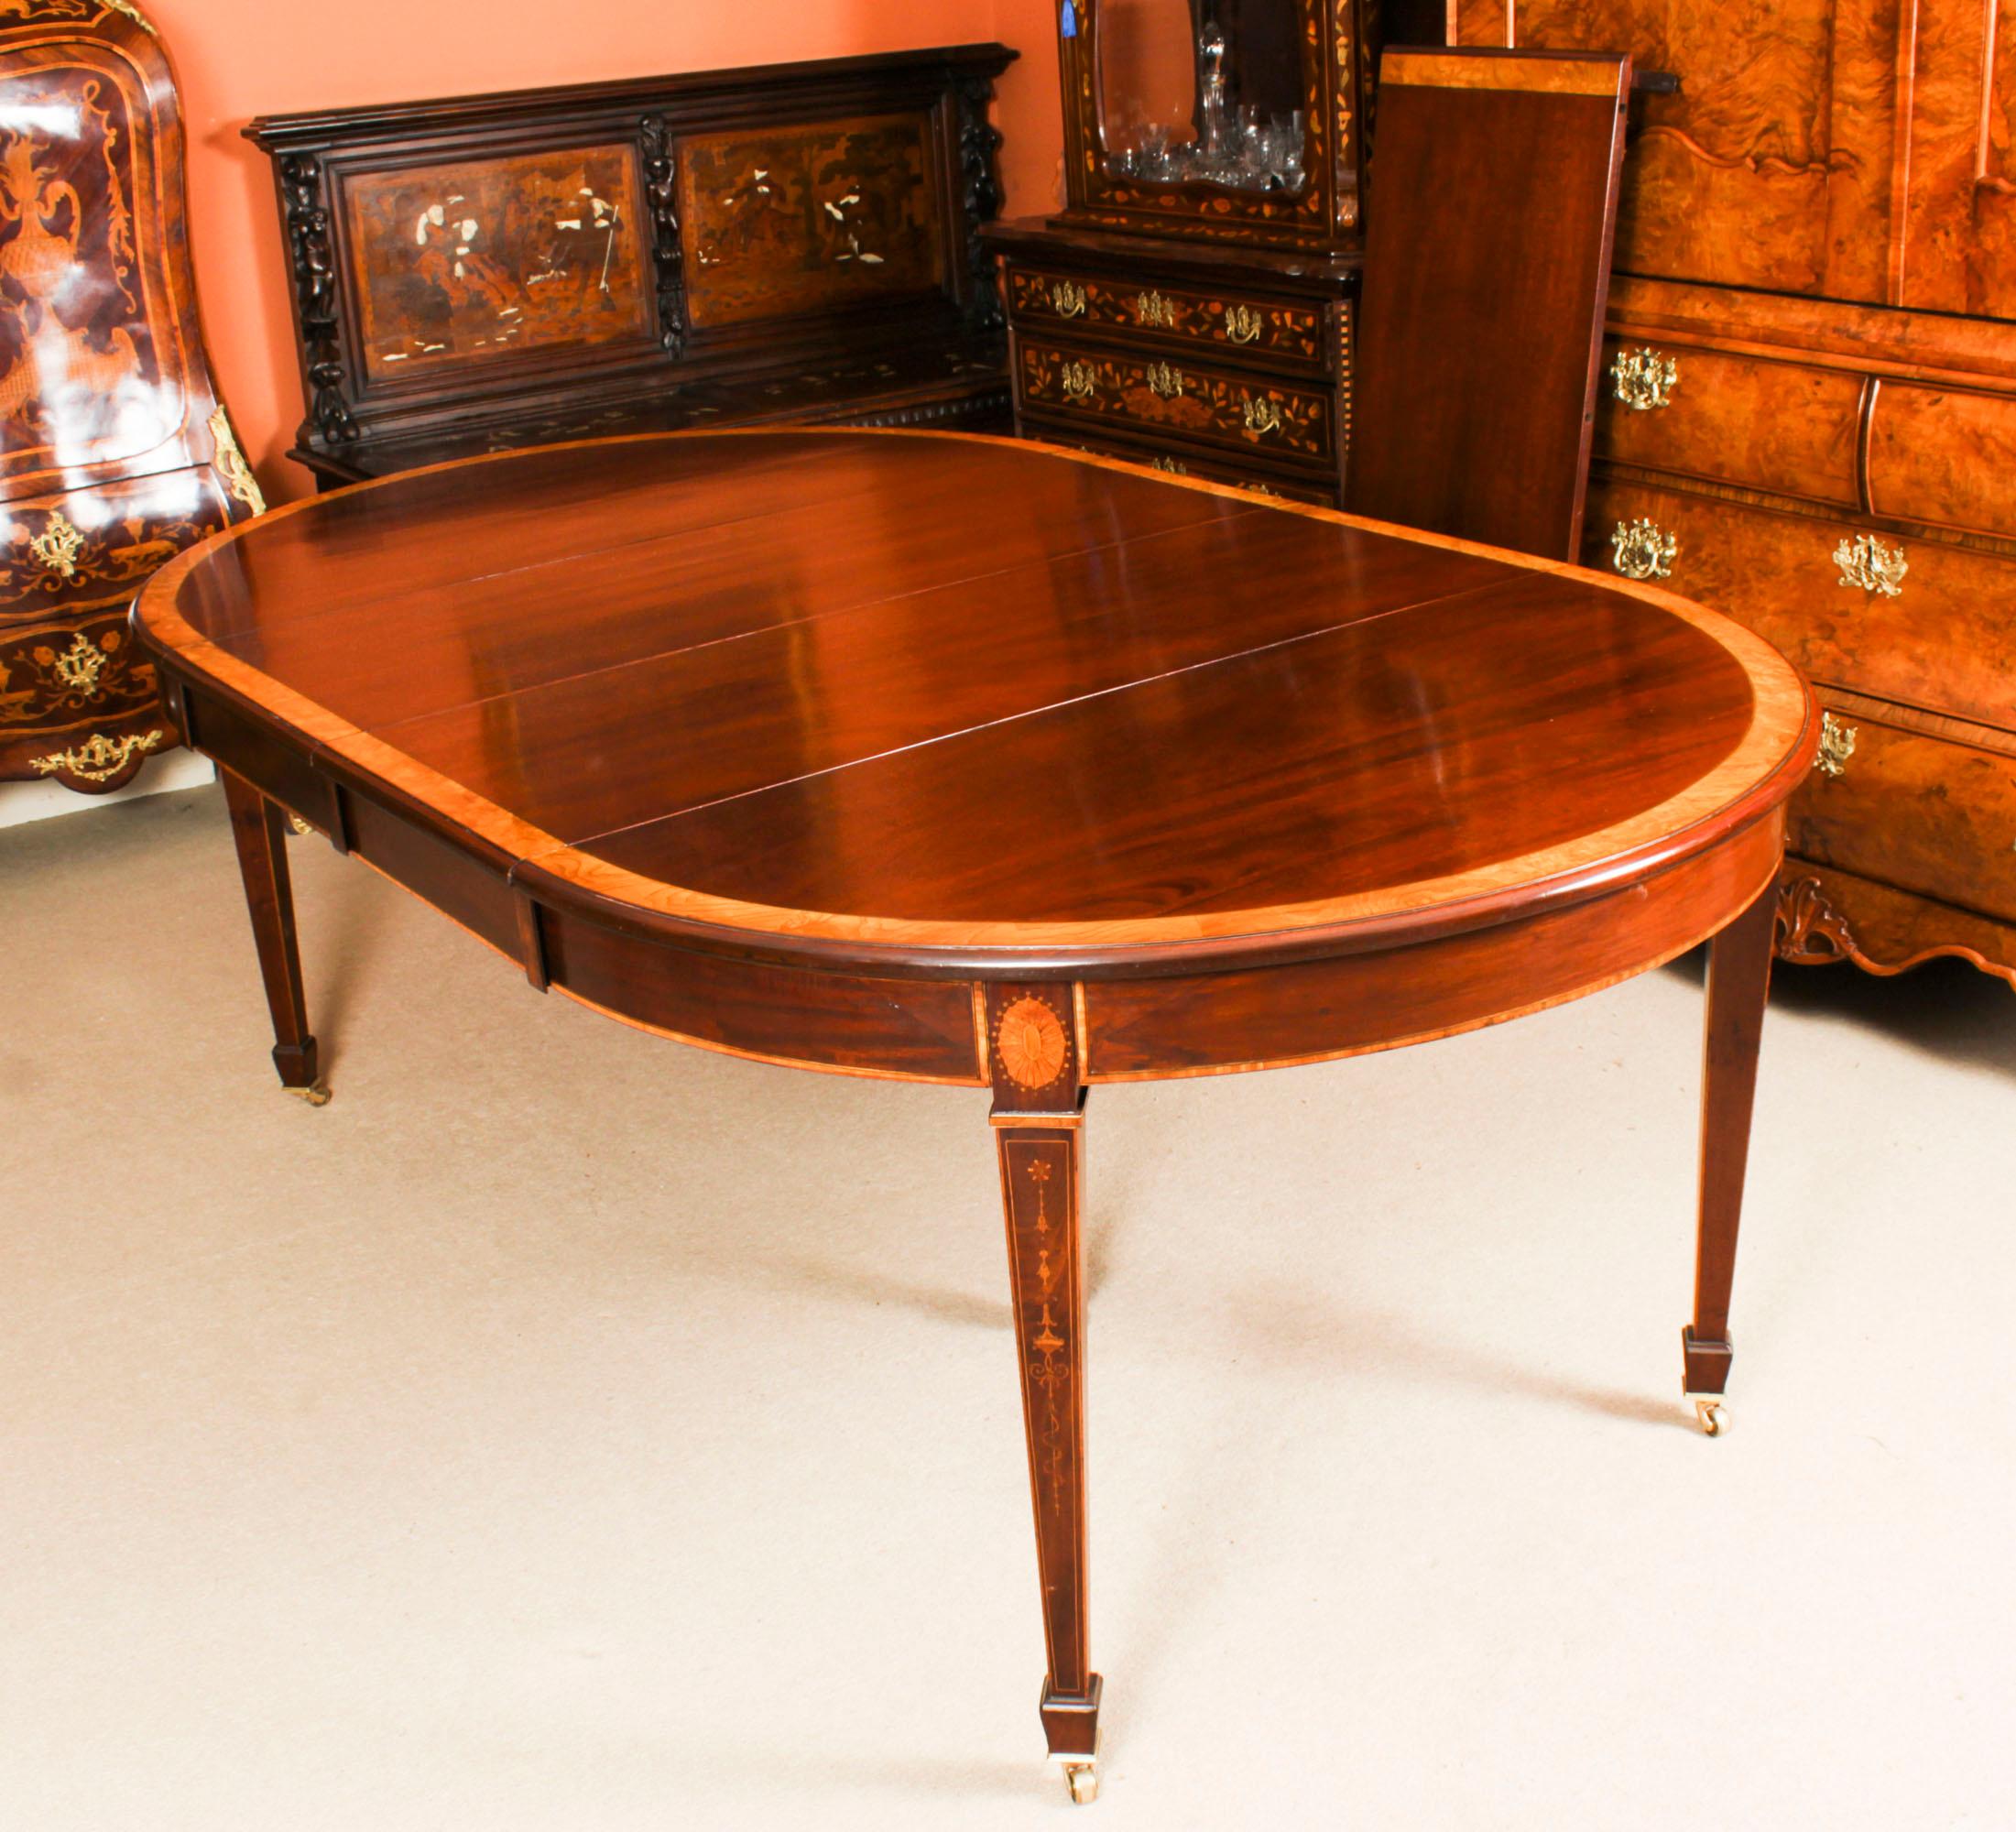 Early 20th Century Antique Edwardian Inlaid Flame Mahogany Extending Dining Table Early 20th C.